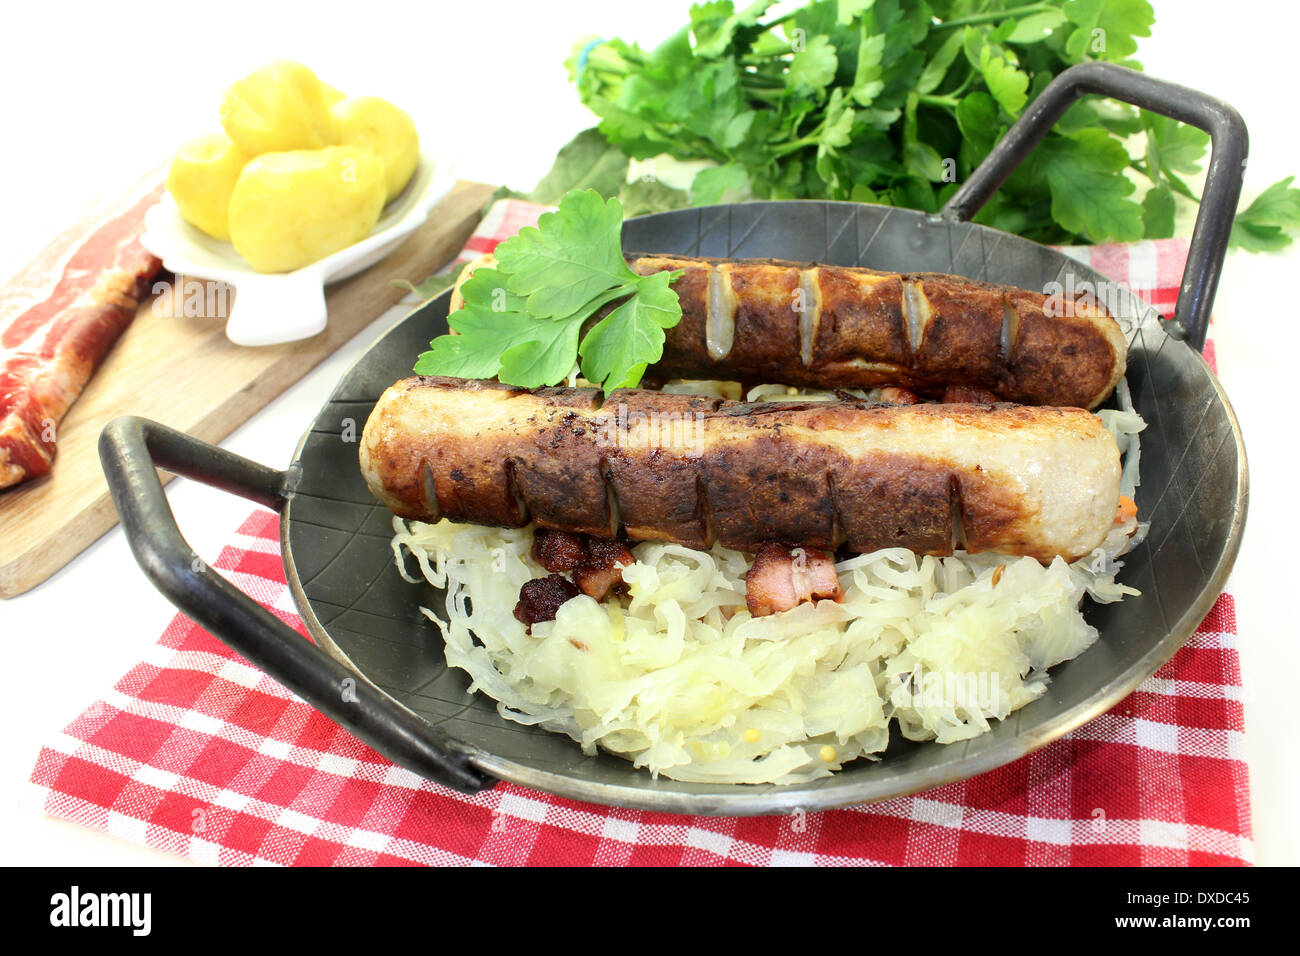 a pan with sourcrout and fried sausage Stock Photo